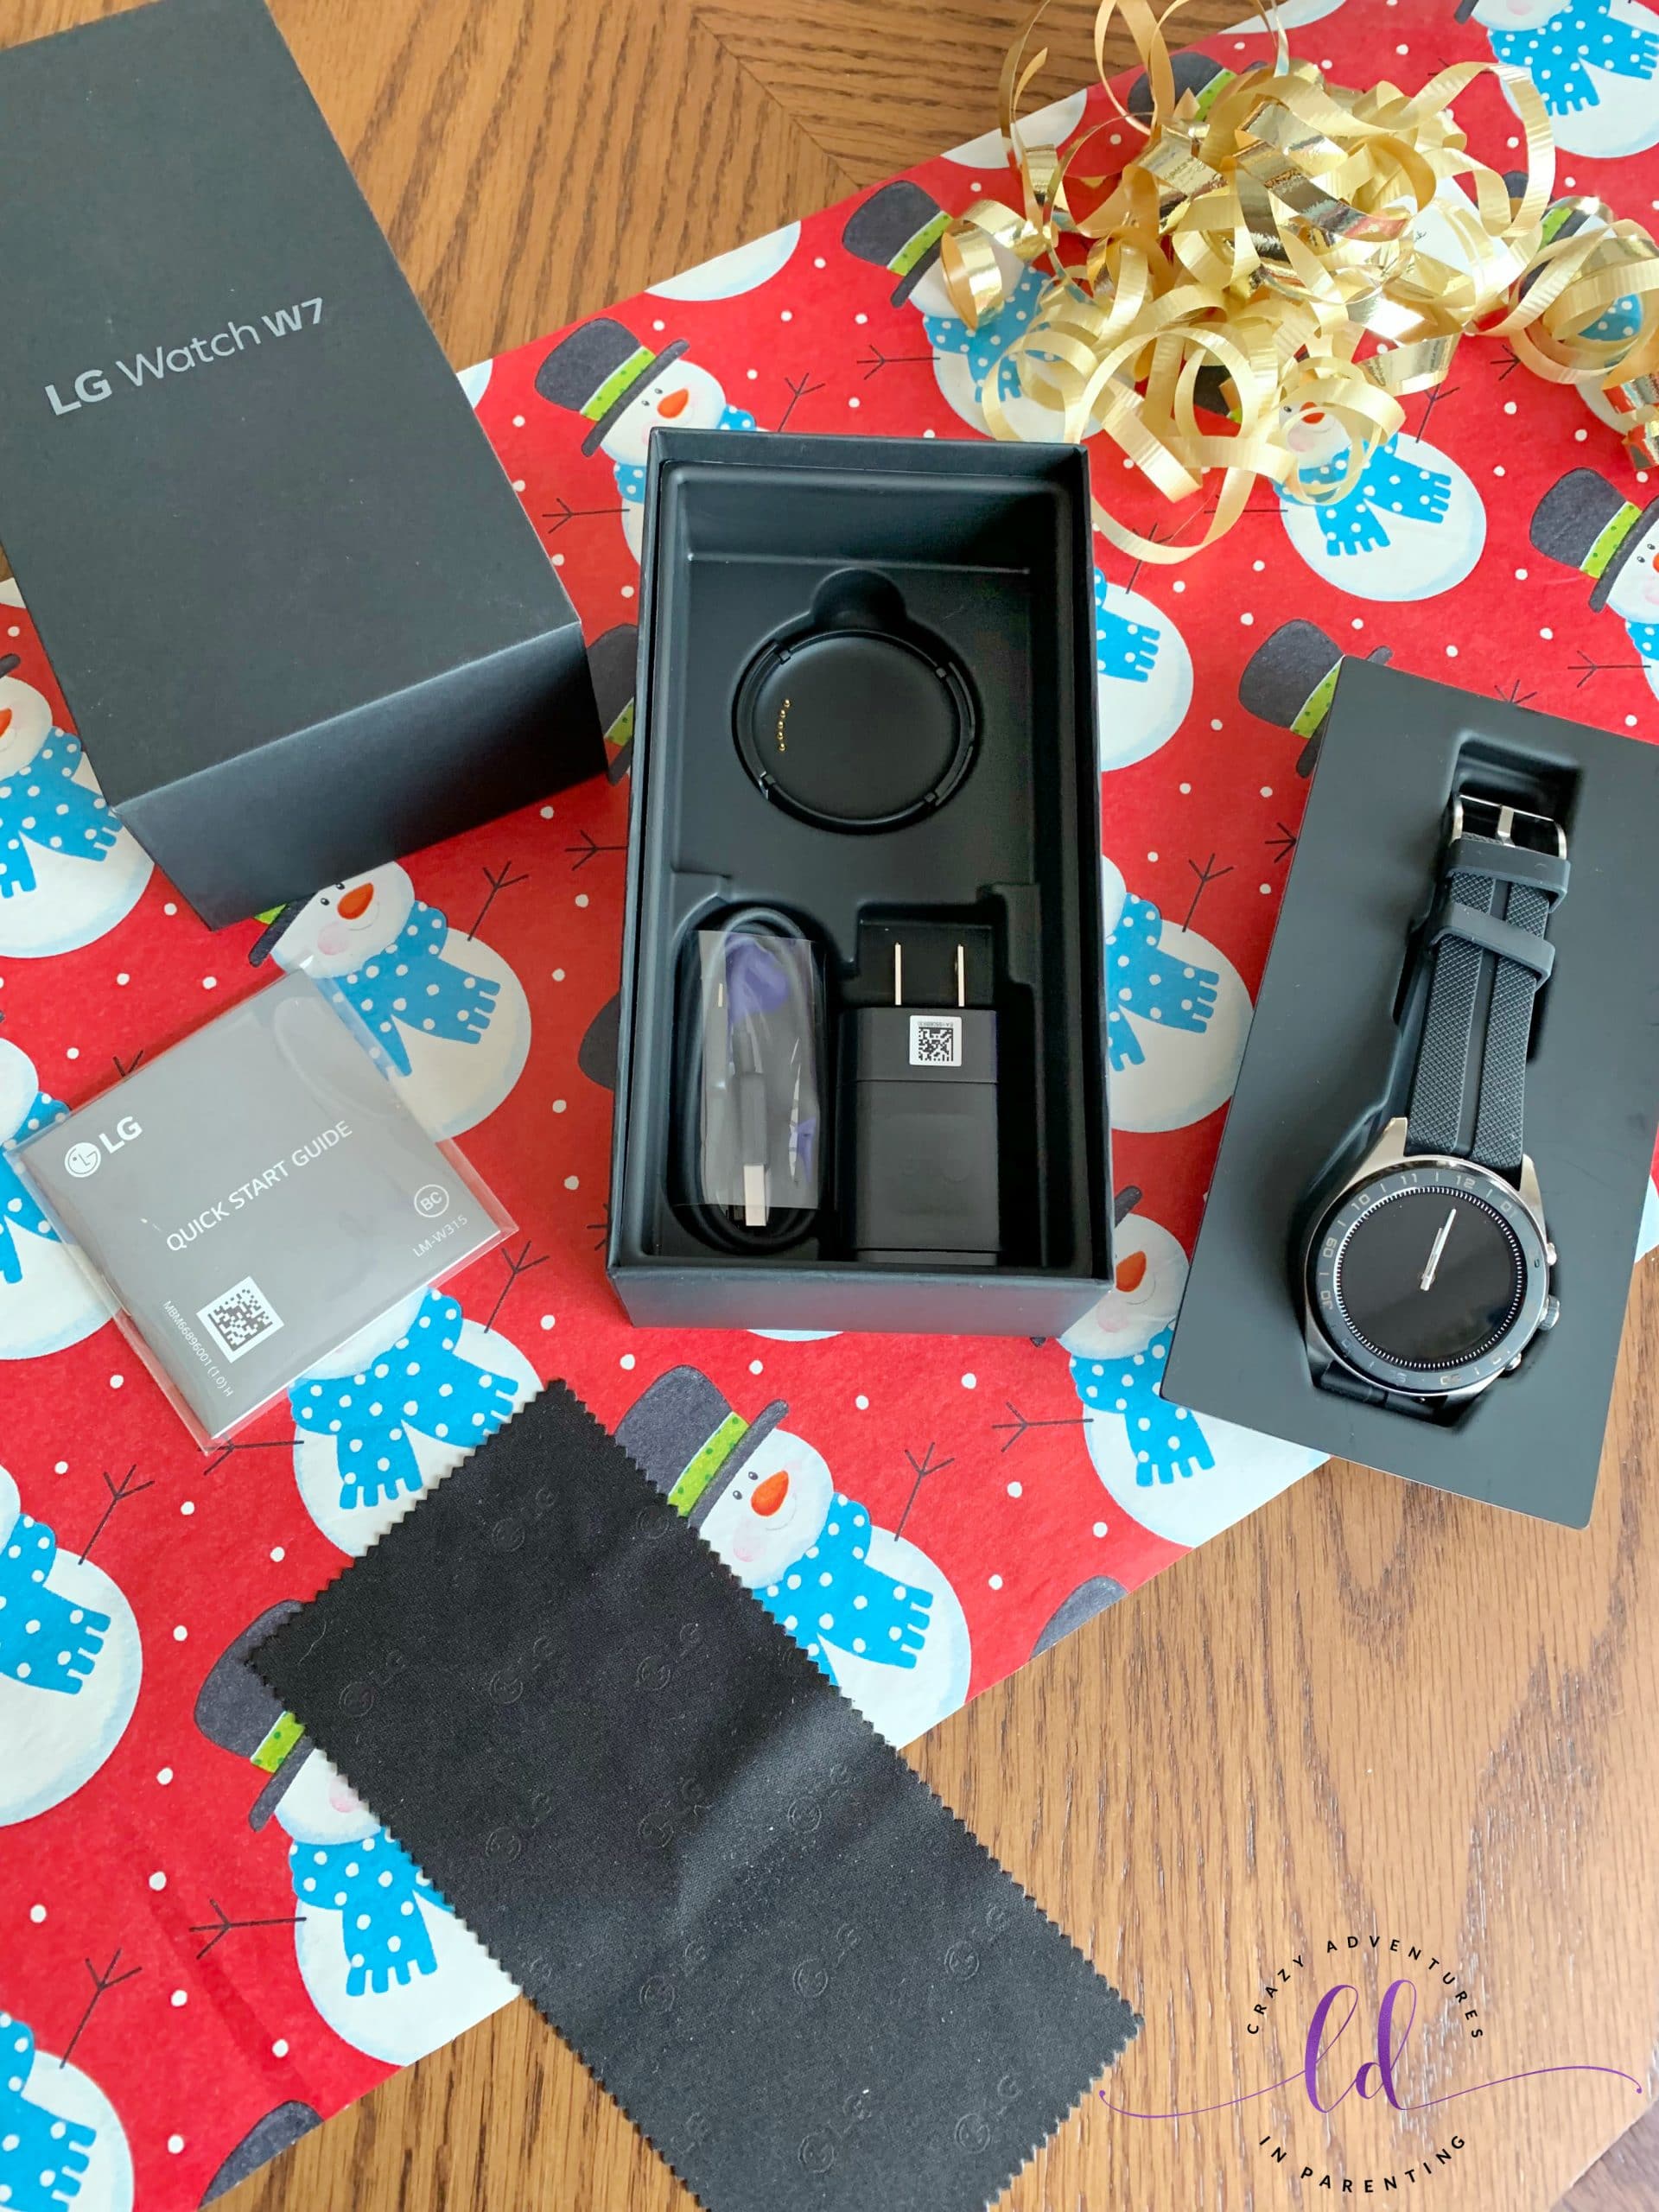 LG Watch W7 smartwatch contents in the box